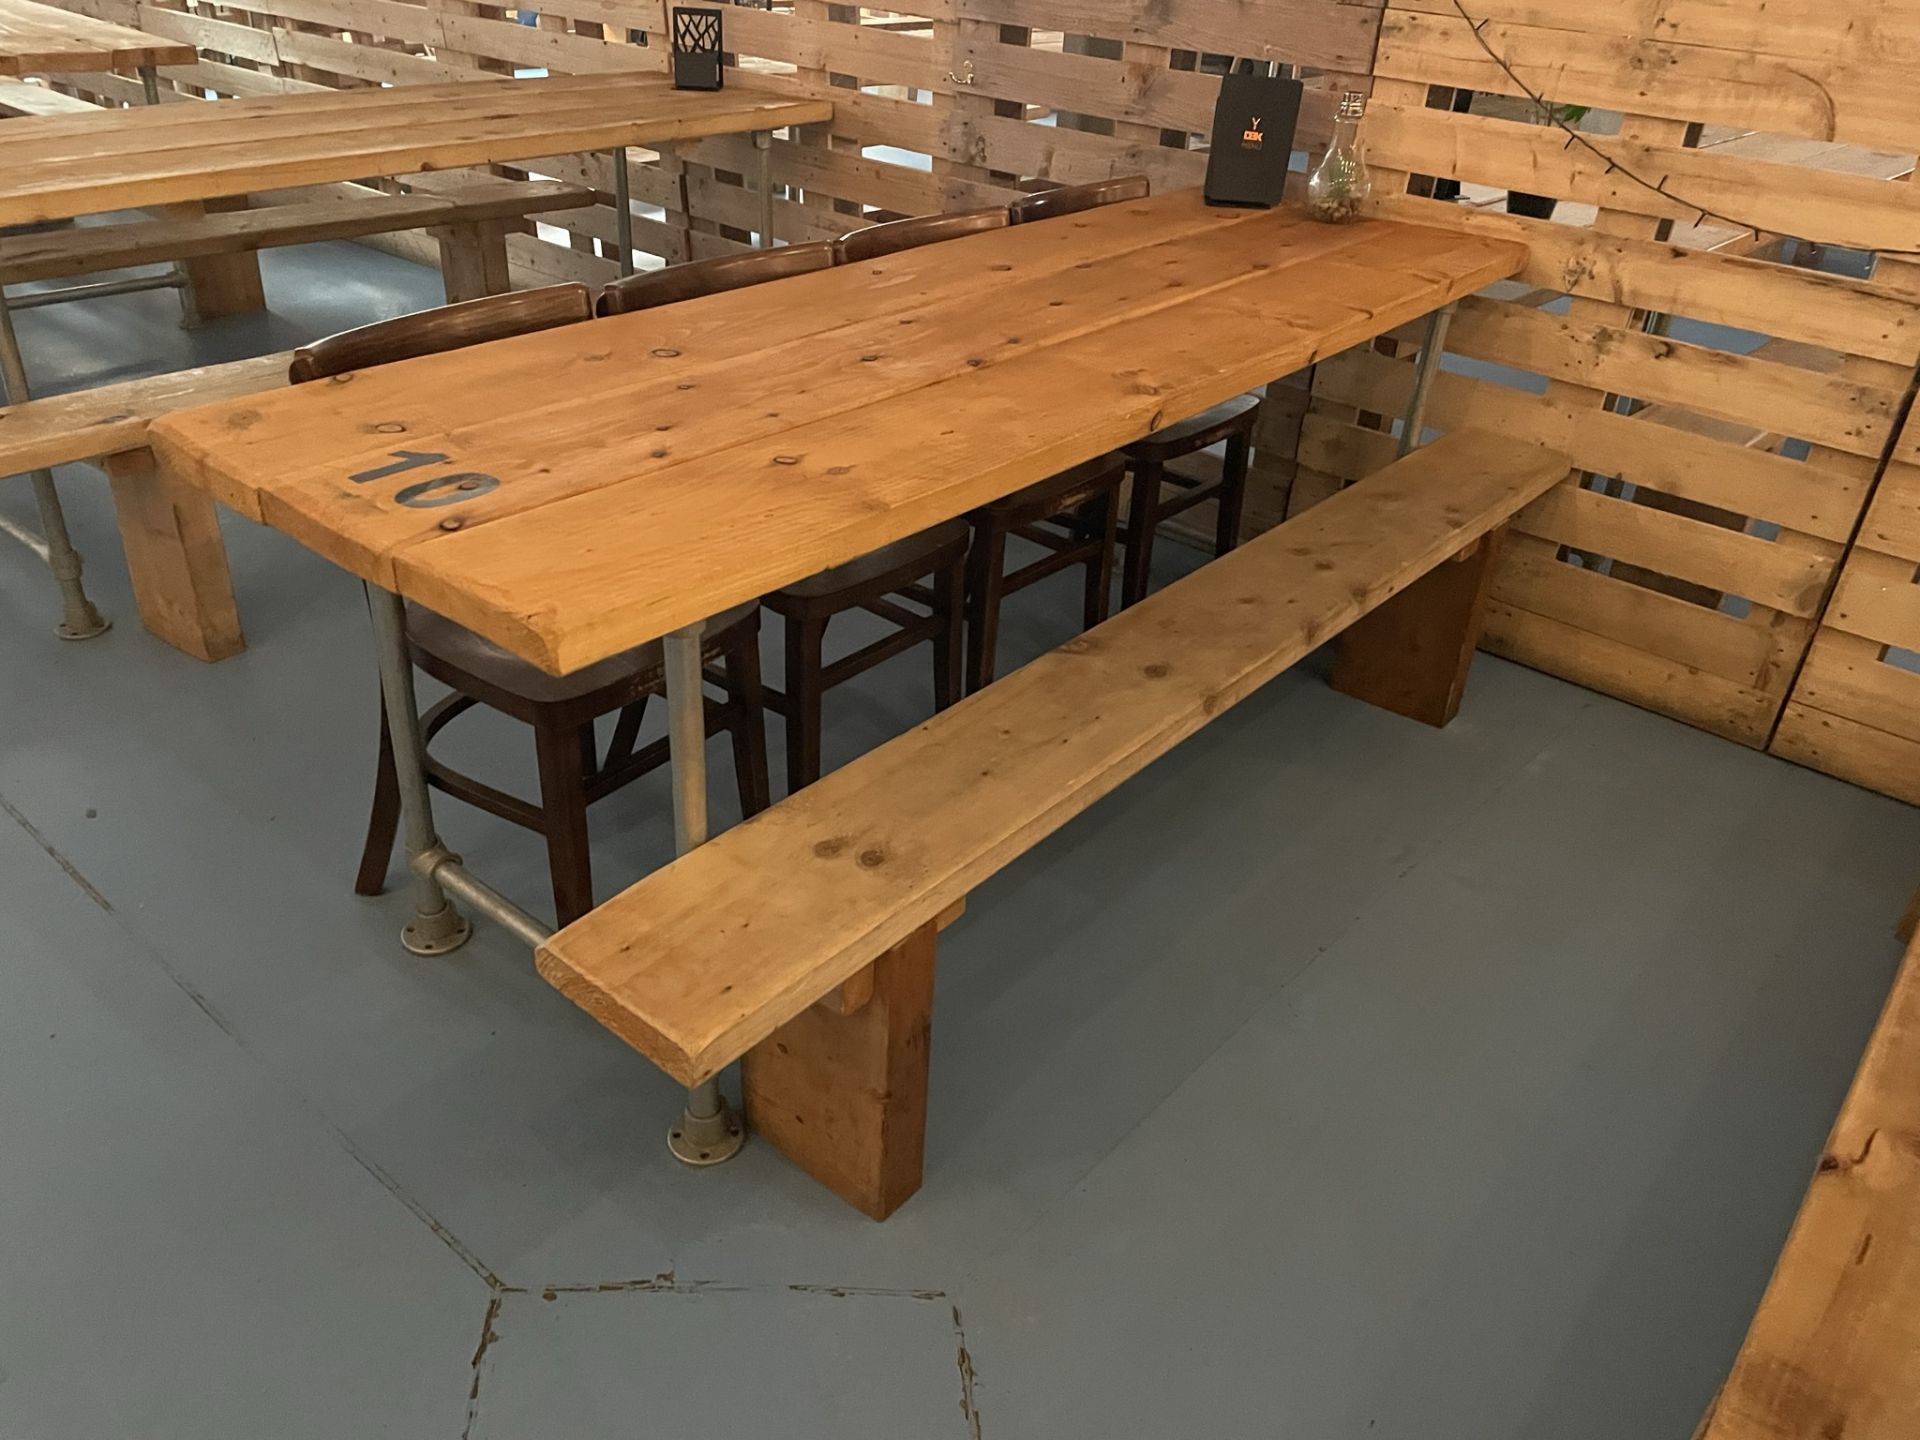 6 x Wooden Dining Tables w/ Metal Frames & 12 x Wooden Seating Benches - Image 4 of 6